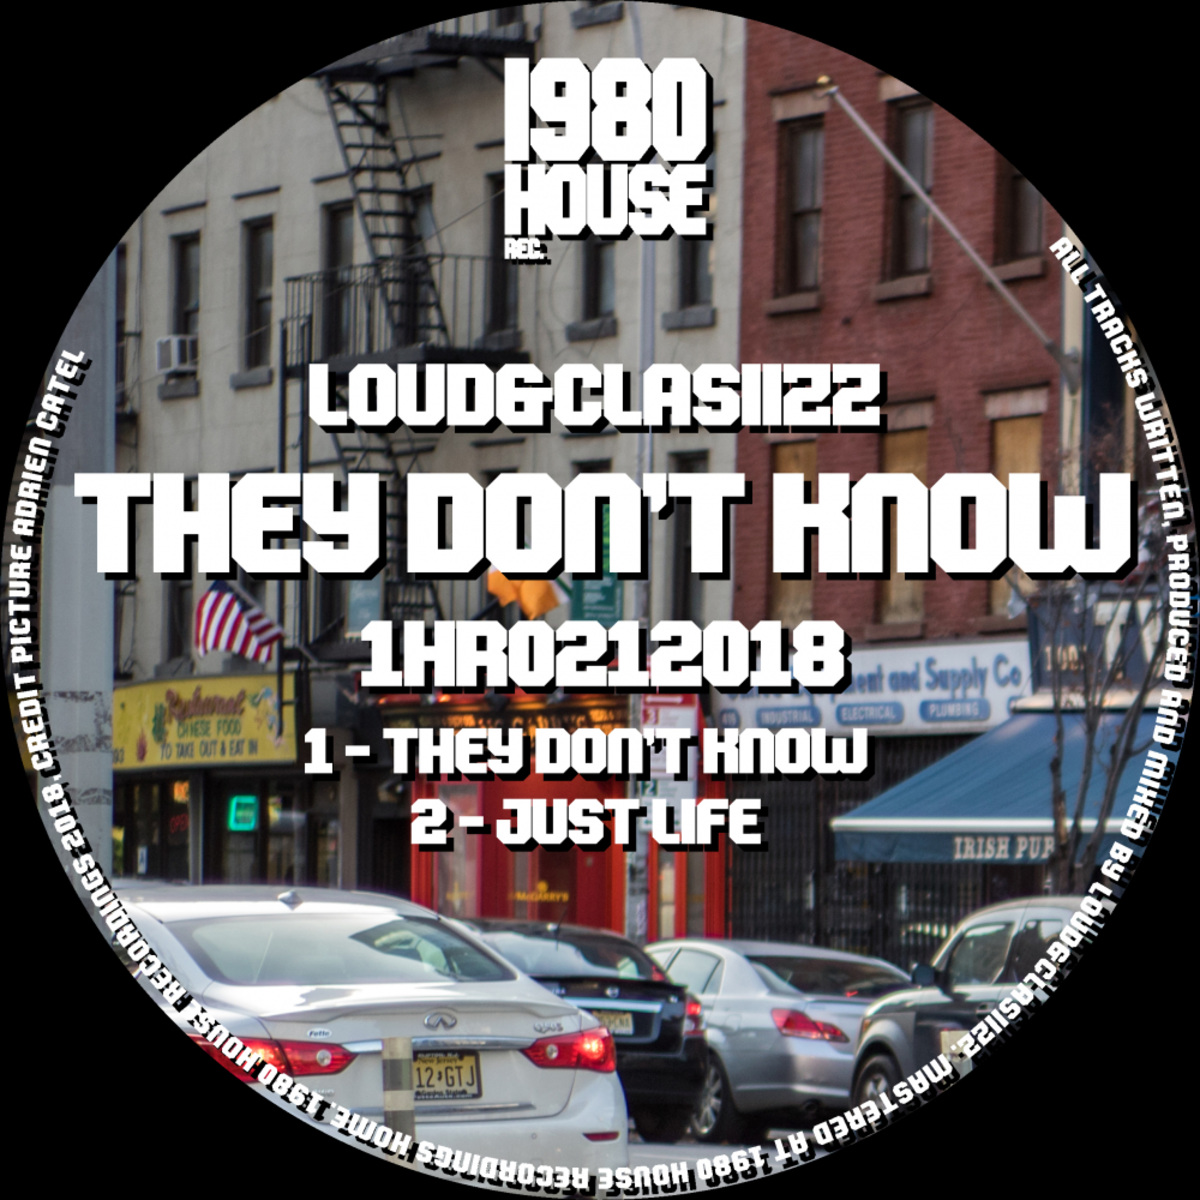 Loud&Clasiizz - They Don't Know / 1980 House Recordings